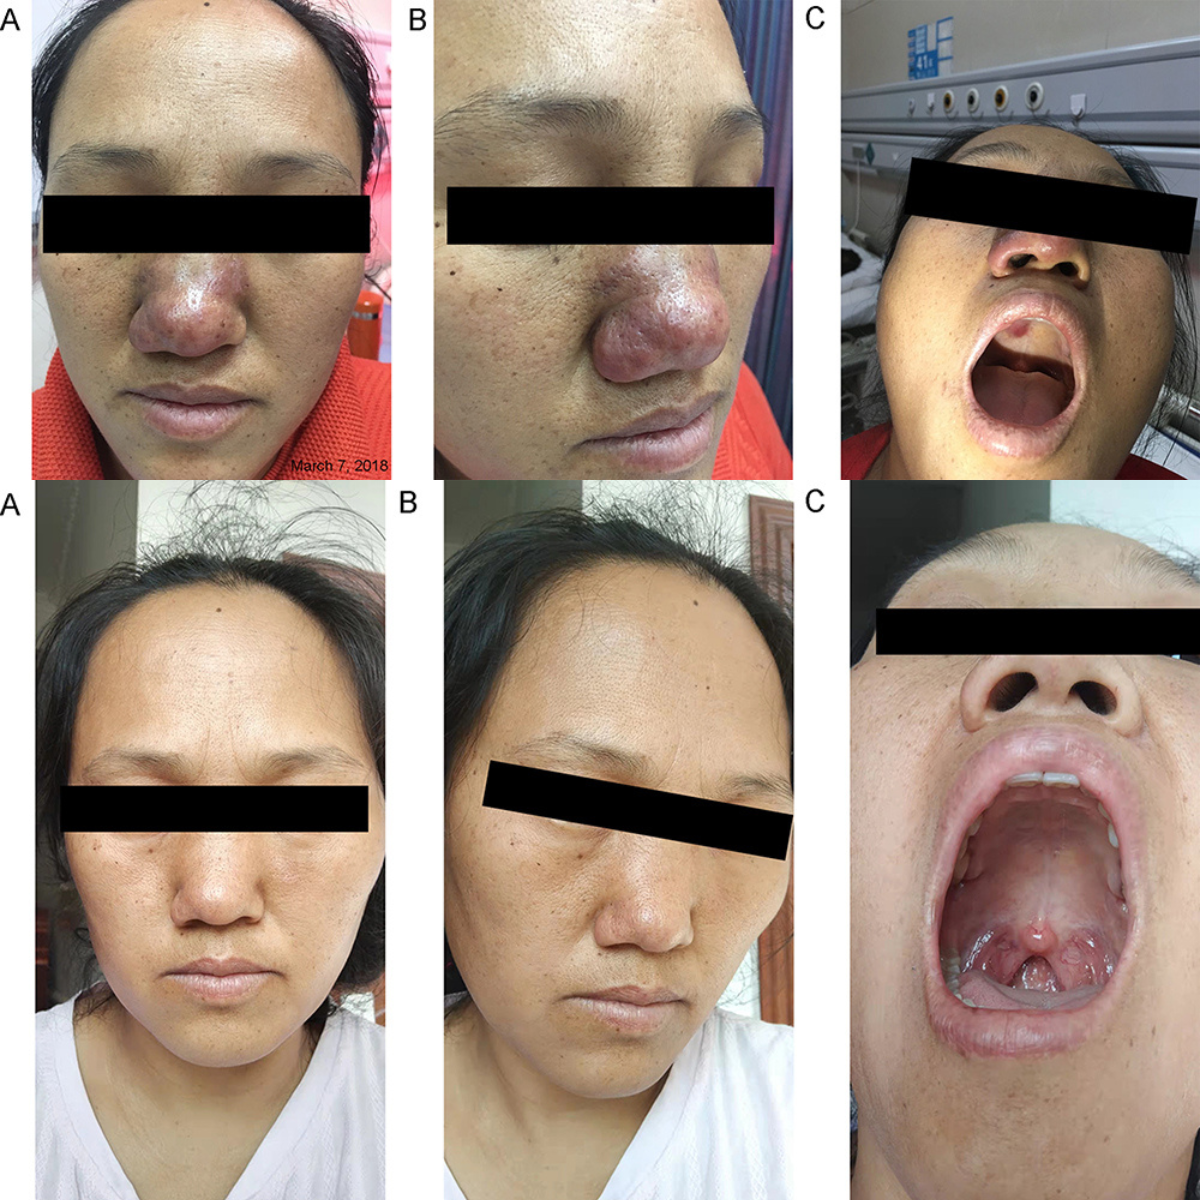 Jessner’s Lymphocytic Infiltration of the Skin Mimicking Rosacea: A Rare Case Presentation